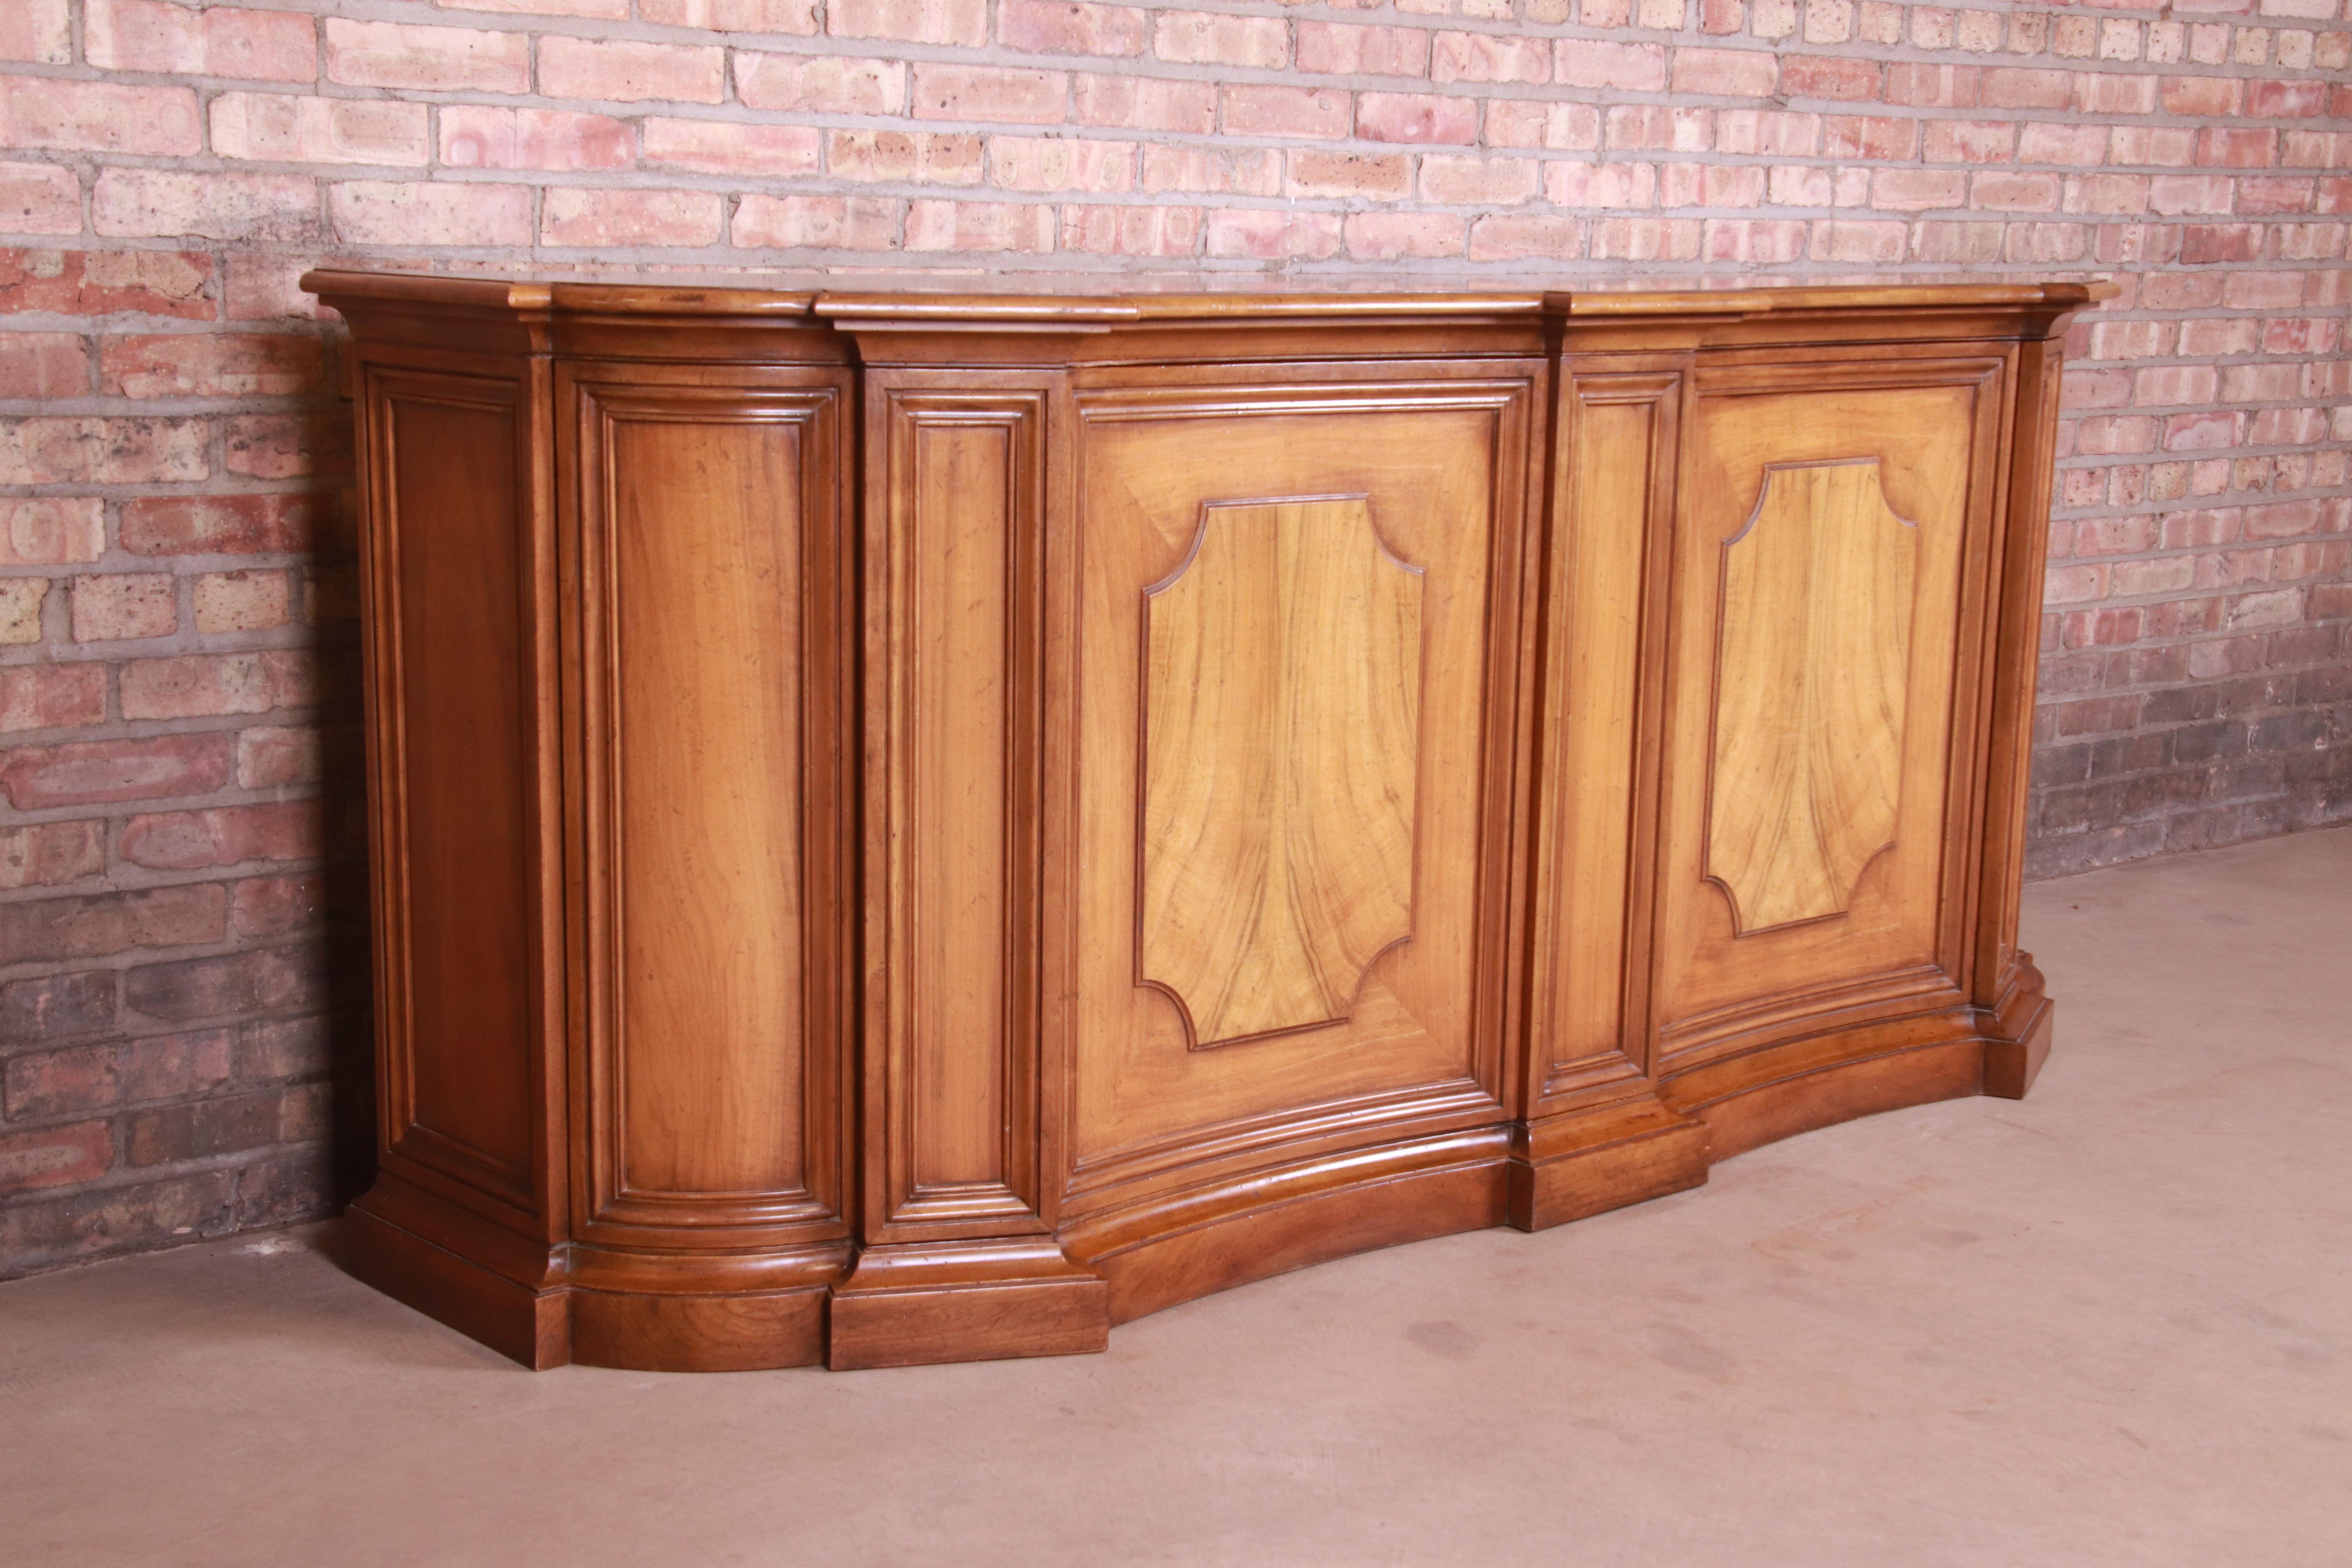 20th Century Baker Furniture French Regency Walnut and Burl Wood Sideboard or Bar Cabinet